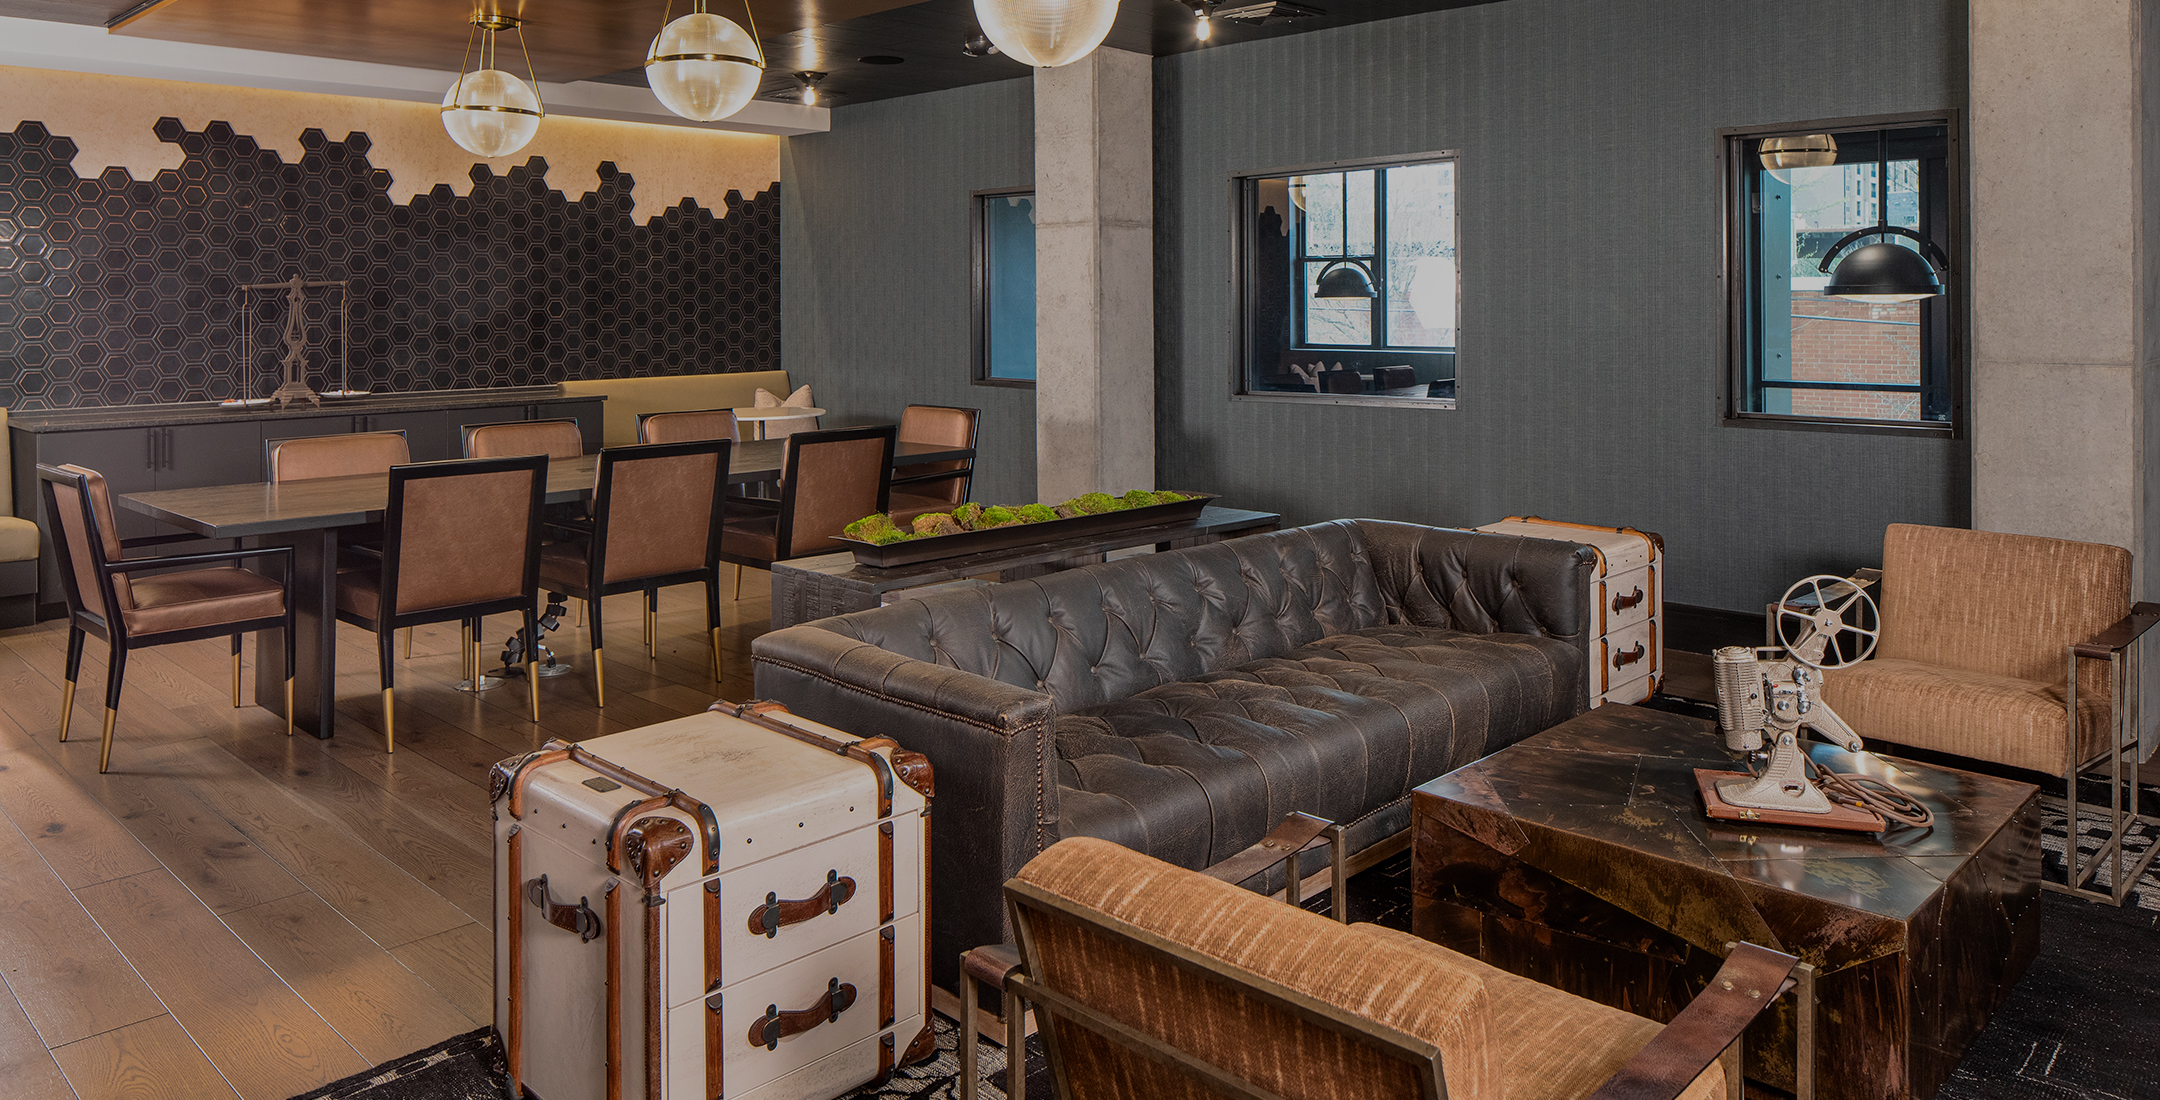 The Line boxcar lounge with social seating and co-working desk space